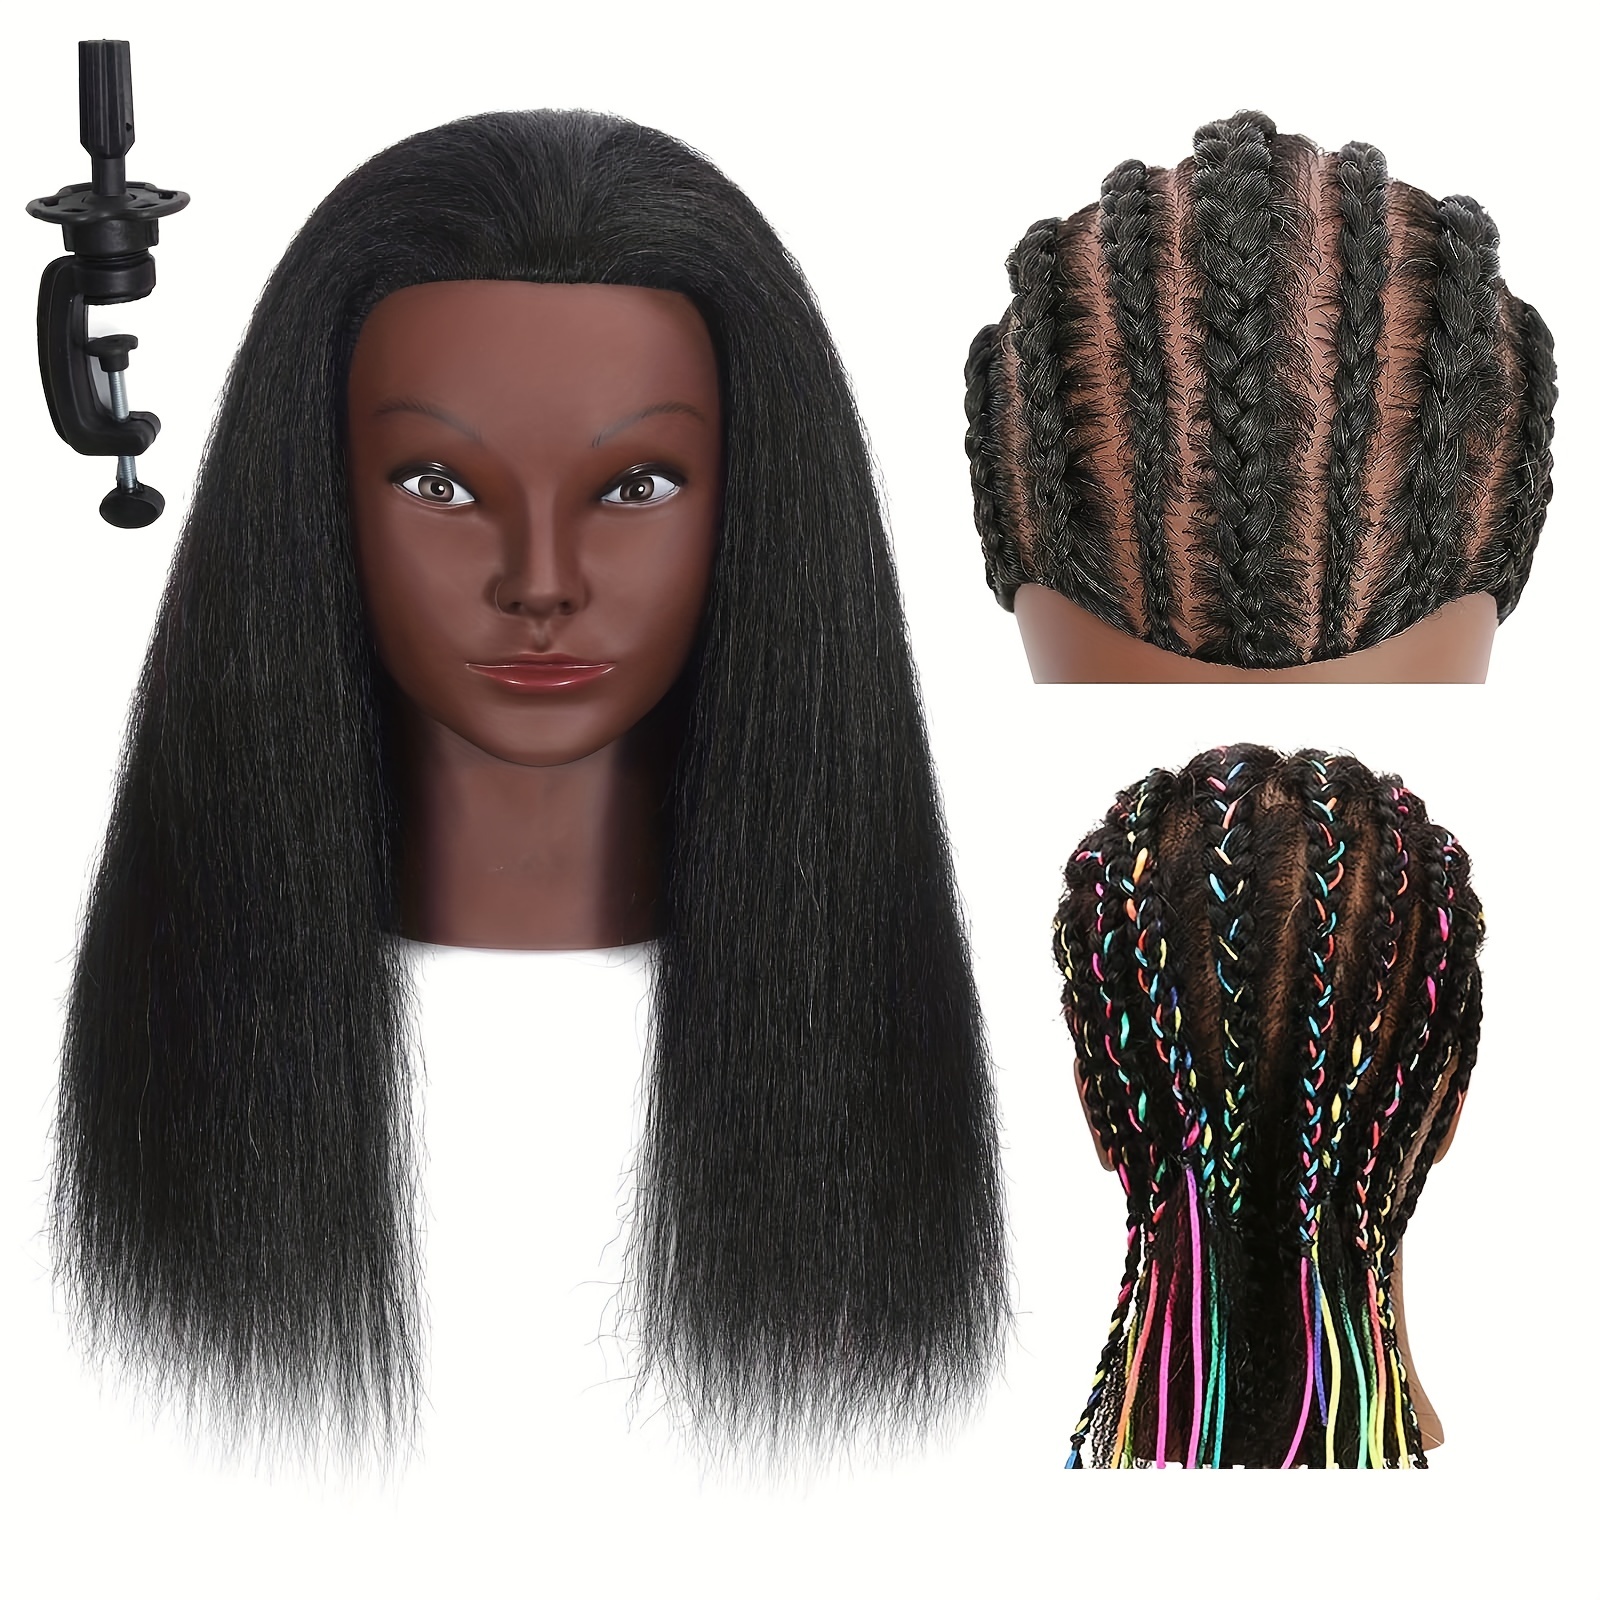 Ruilong Bald  Black Mannequin Head With Stand Holder Cosmetology  Practice African Training Manikin Head For Hair Styling Wigs Making 211013  From Ruiqi06, $13.99